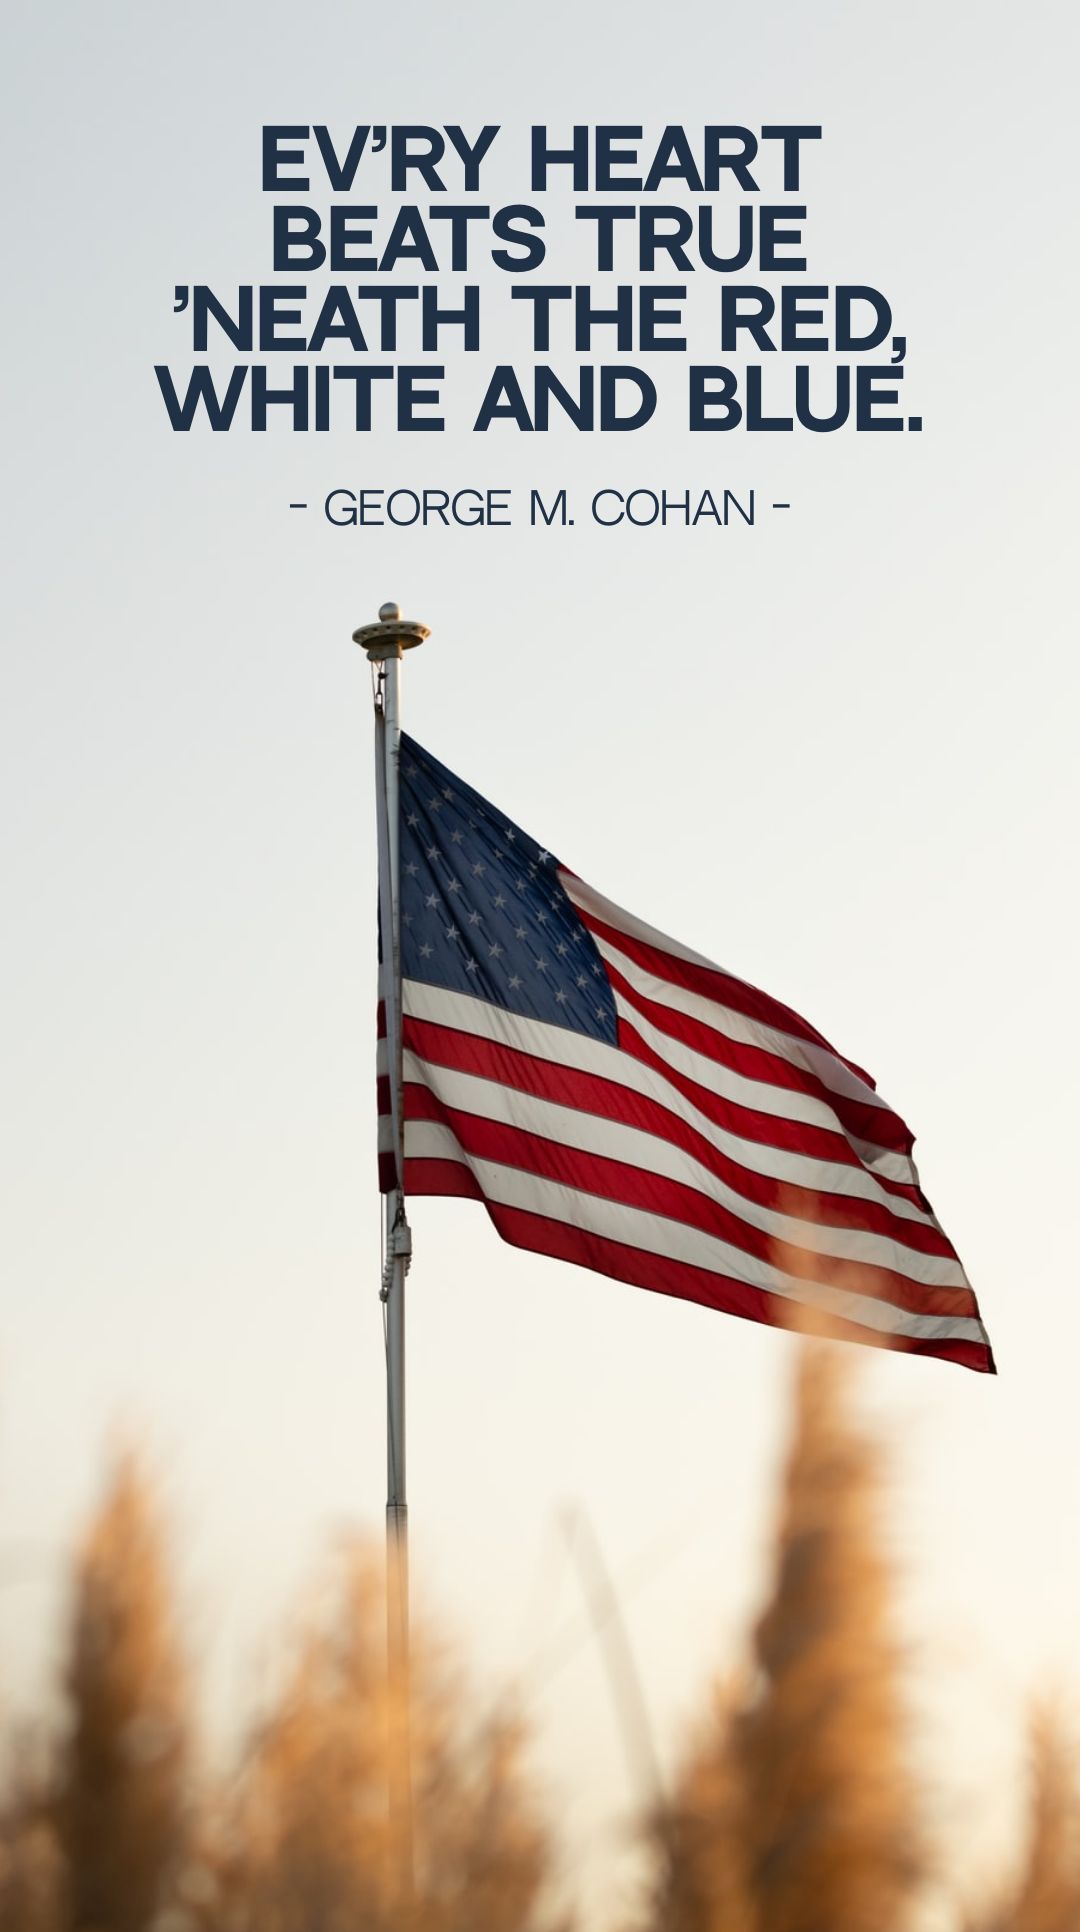 George M. Cohan - Ev'ry heart beats true 'neath the Red, White and Blue.